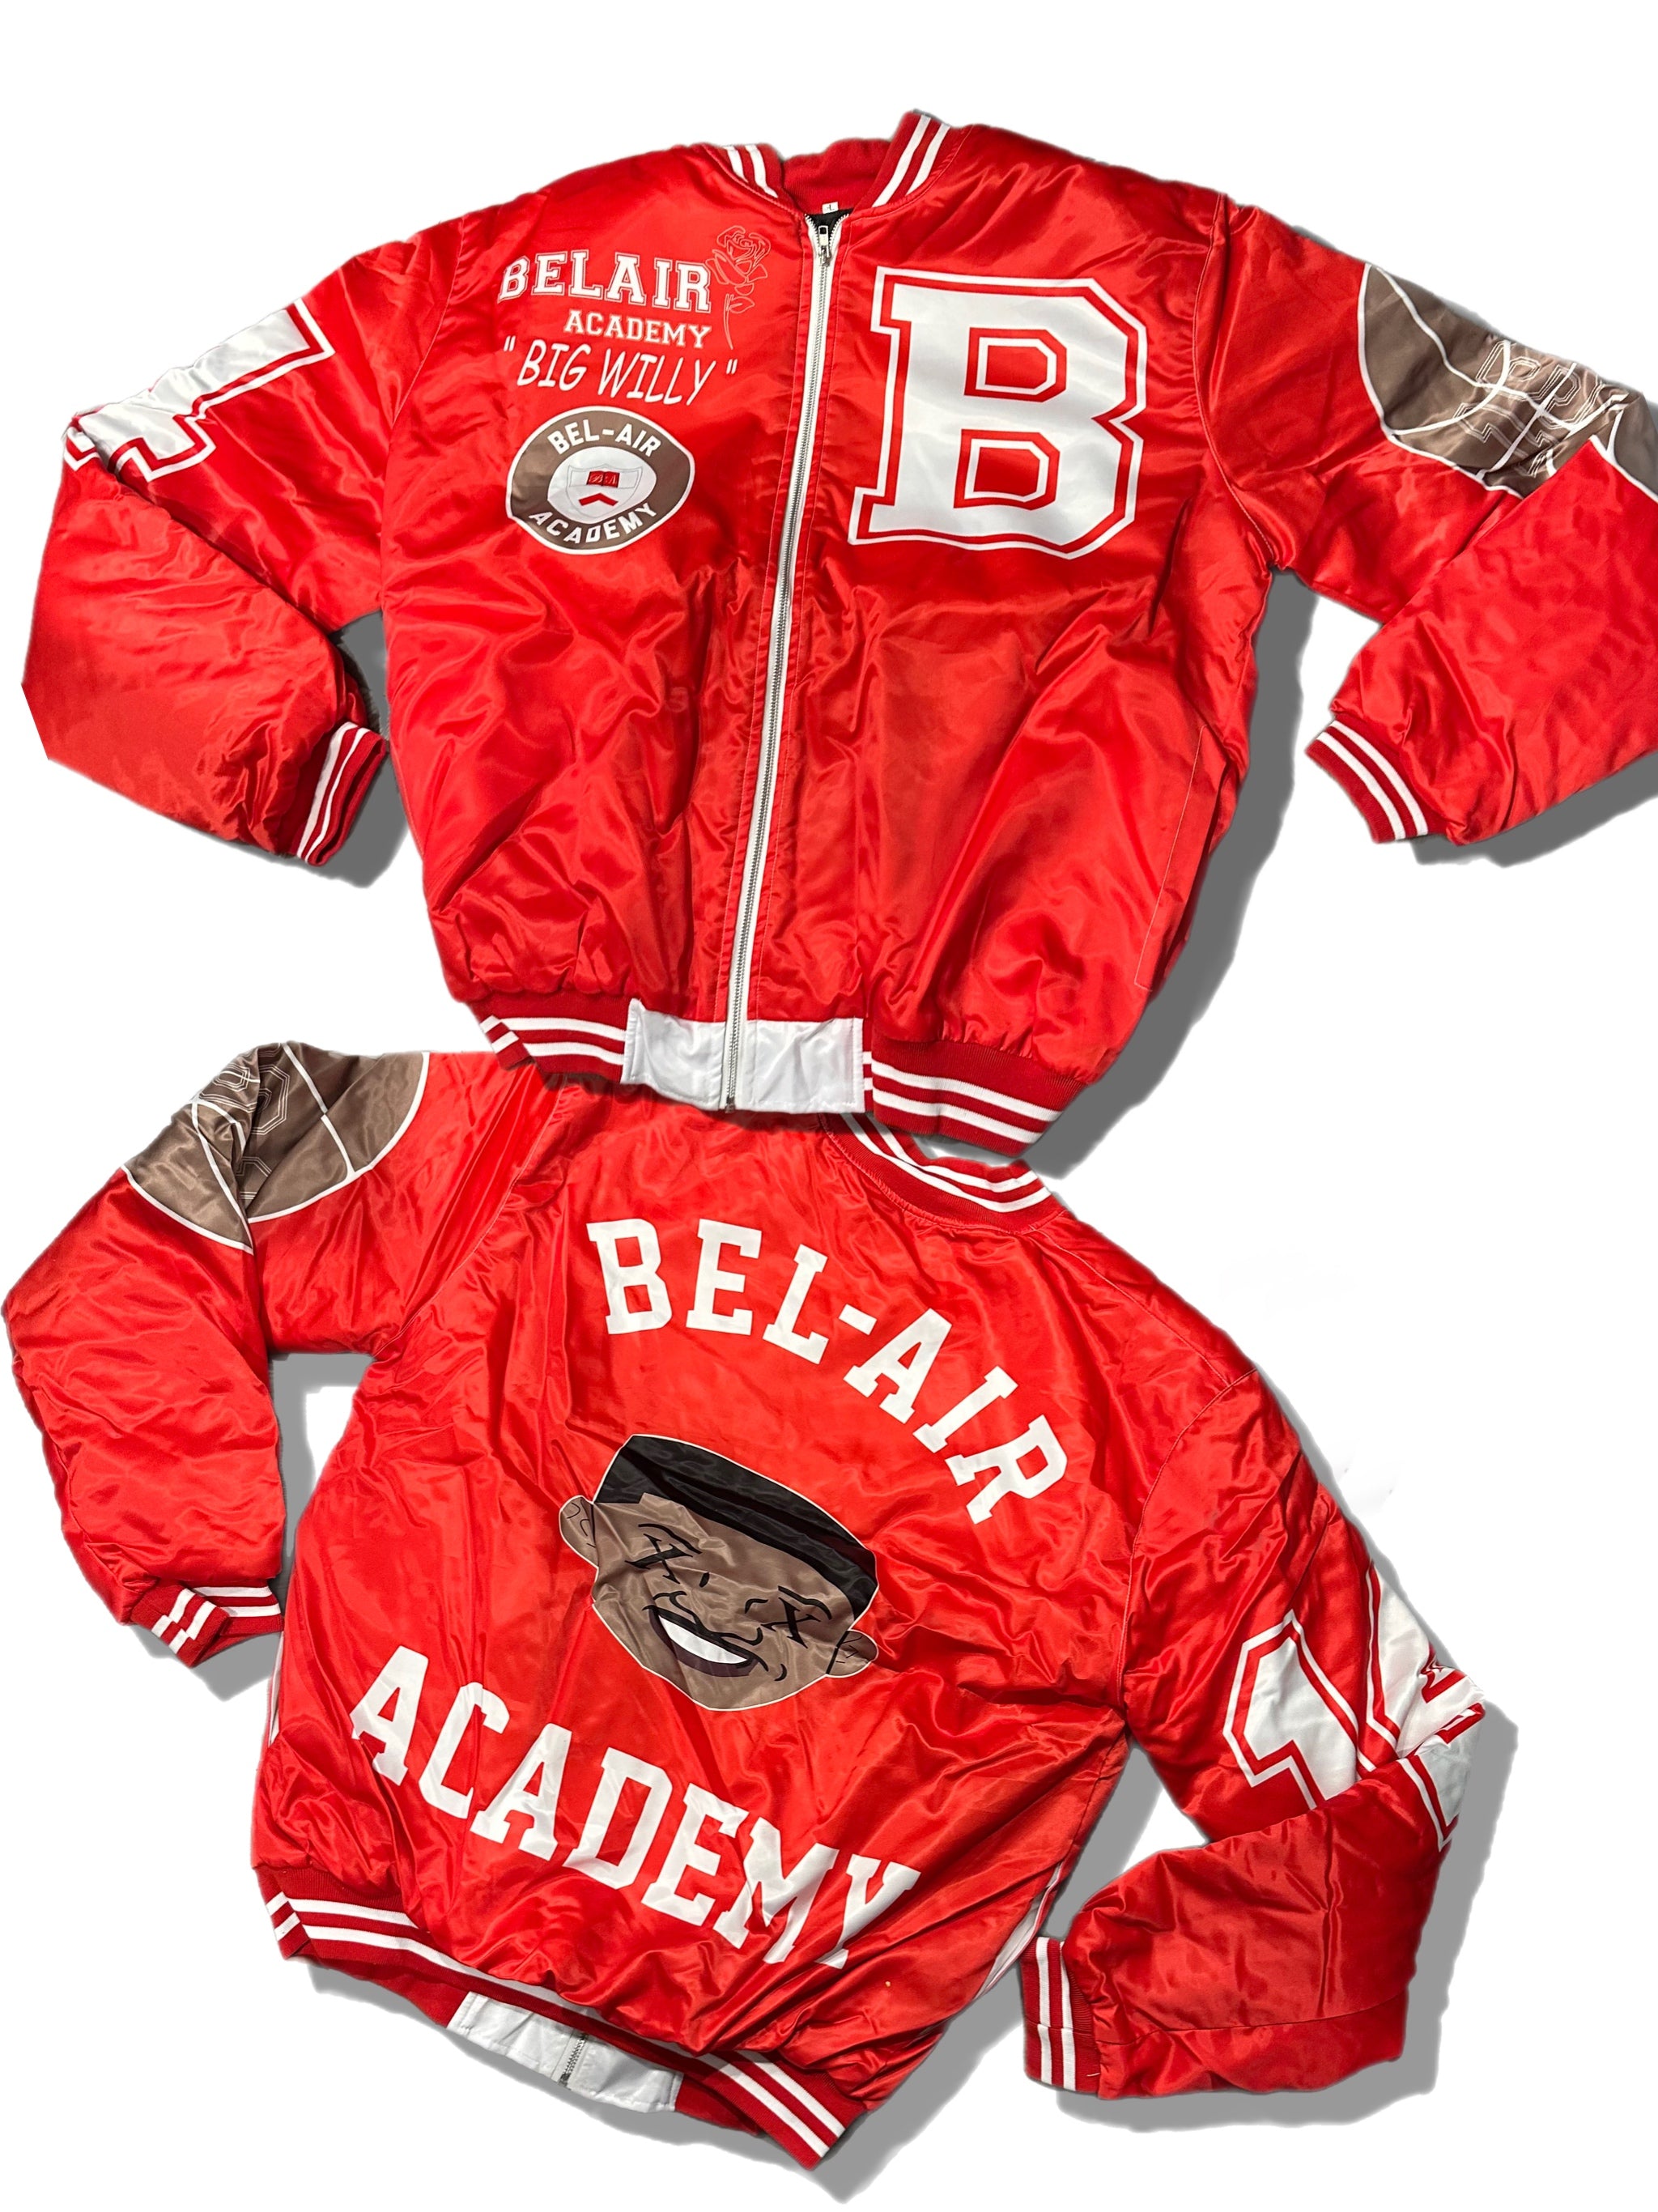 Deal red Sub Belair bomber